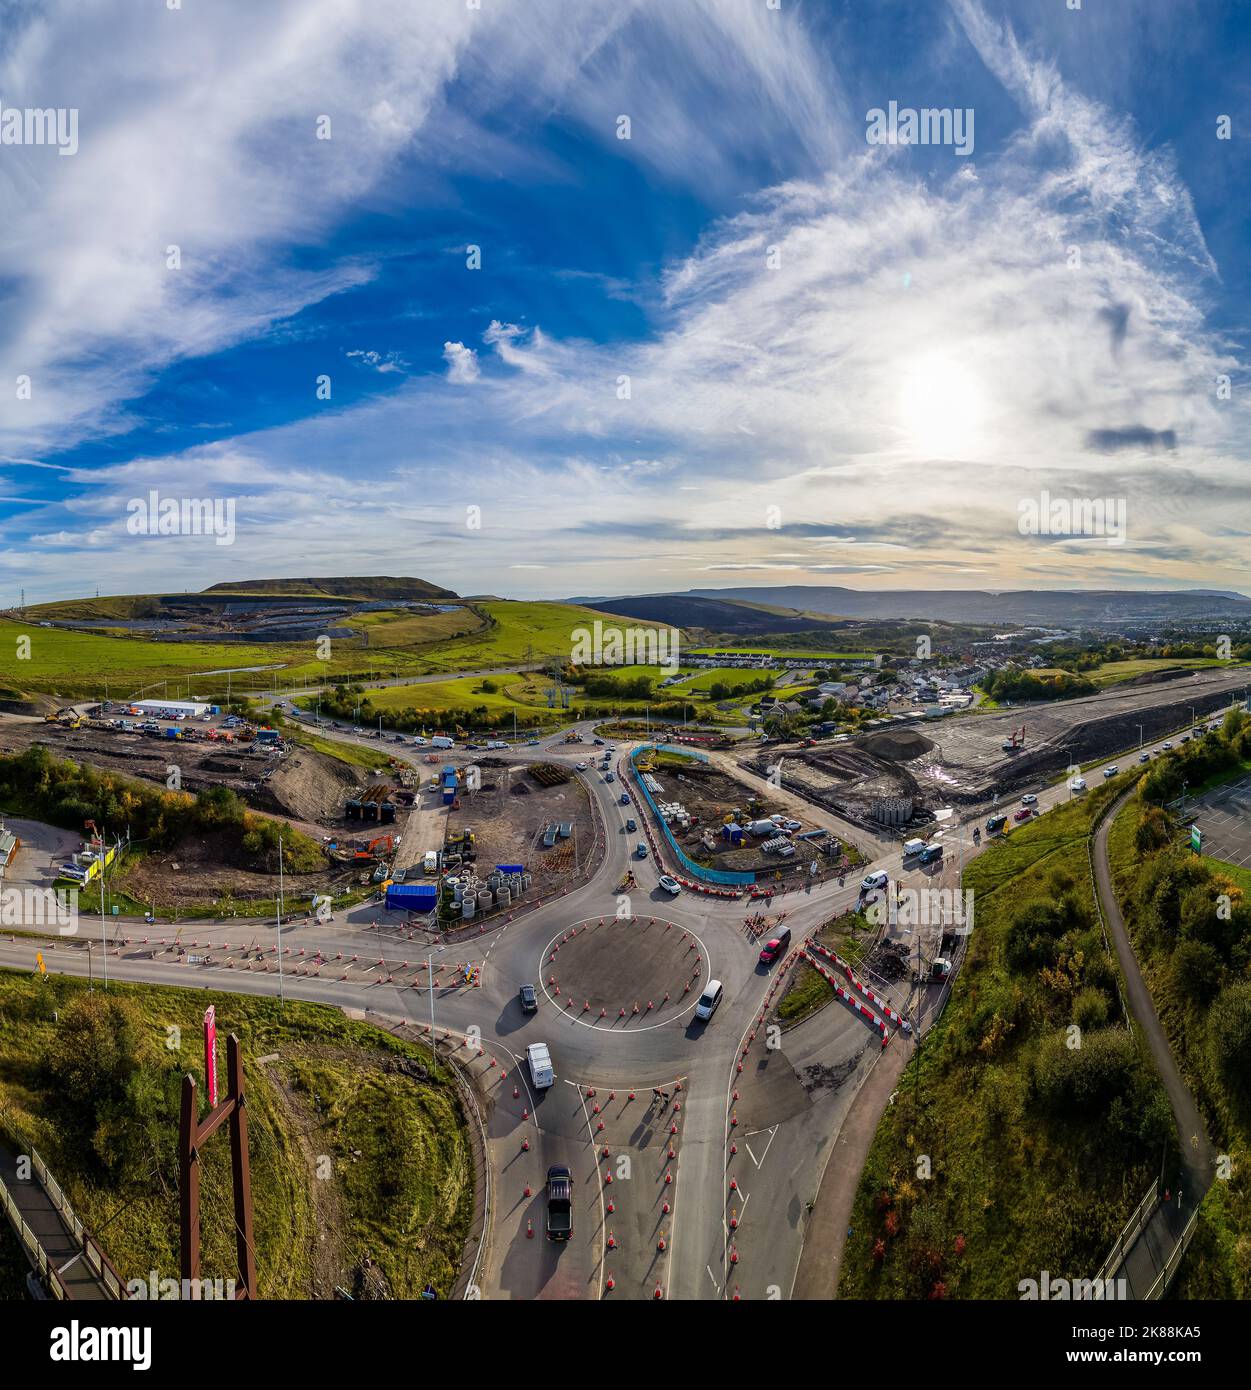 DOWLAIS, WALES, UK - OCTOBER 18 2022: Panoramic aerial view of roadworks and traffic cones during the dualling of the A465 road in South Wales. Stock Photo